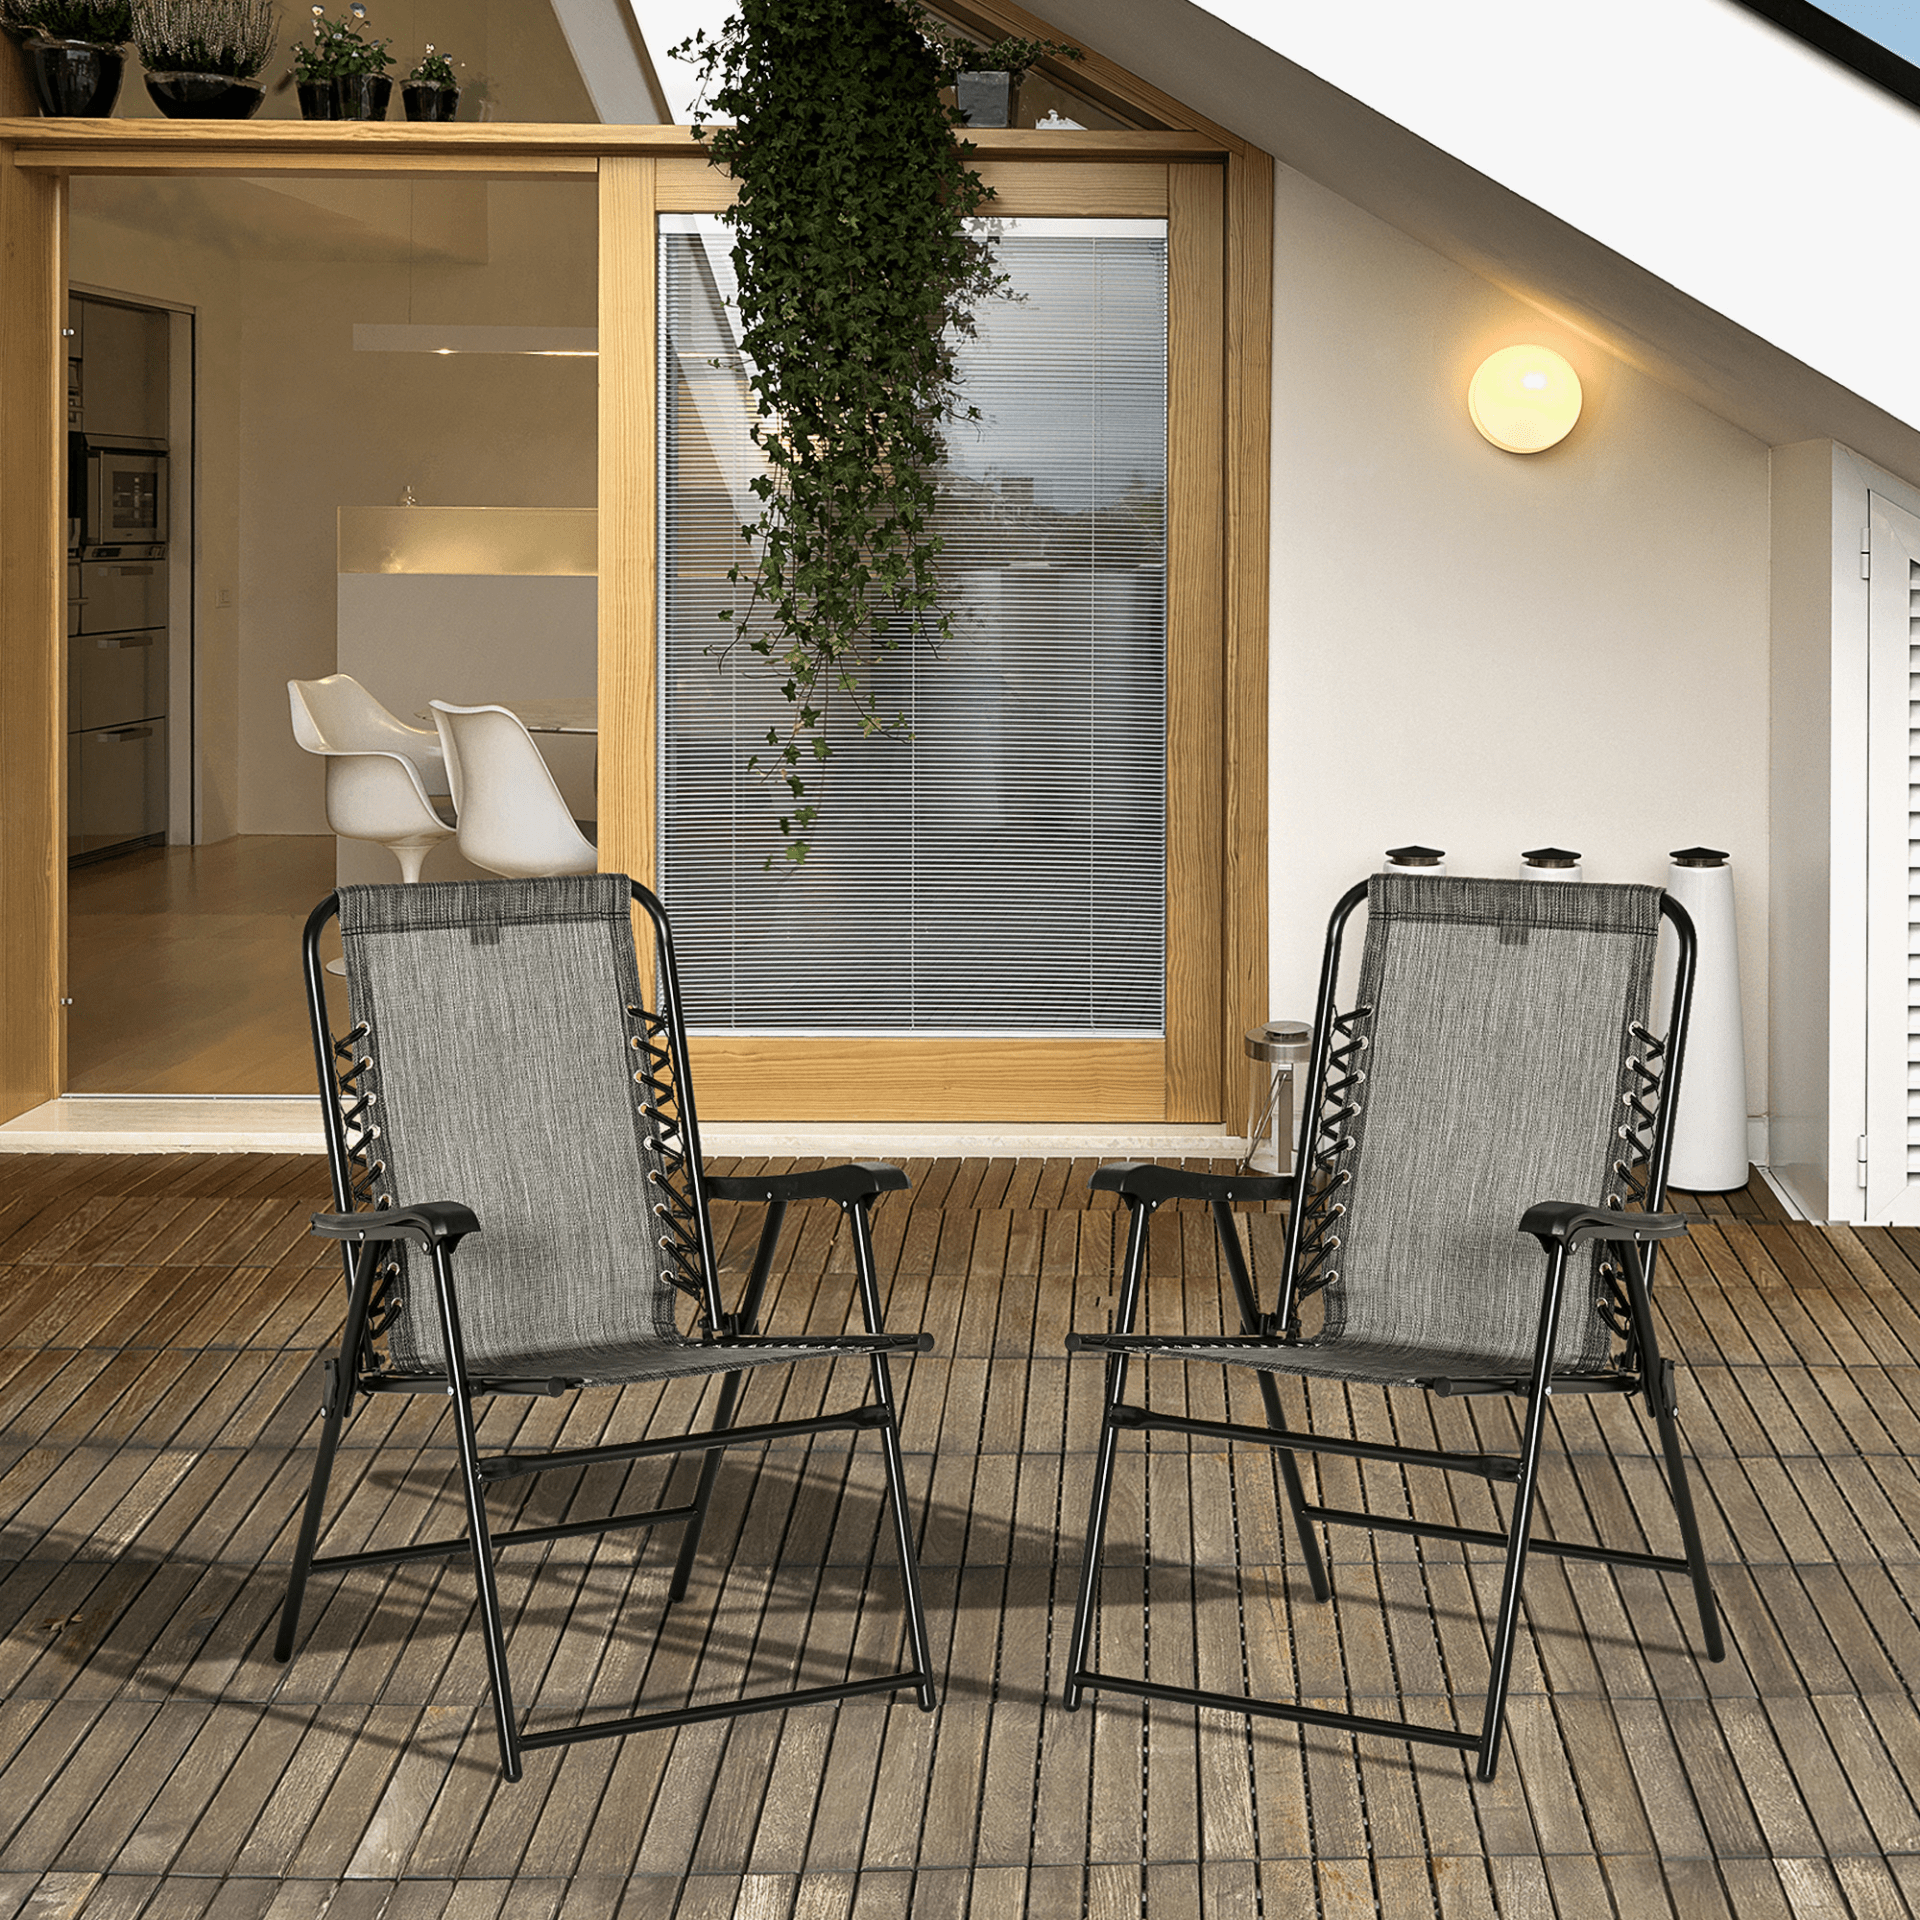 Outsunny Set of 2 Patio Folding Dining Chair Set Garden Outdoor Portable for Camping Pool Beach Deck Lawn with Armrest, Grey - Comfortable, Stylish, and Portable Chairs Camping Chair Cosy Camping Co.   